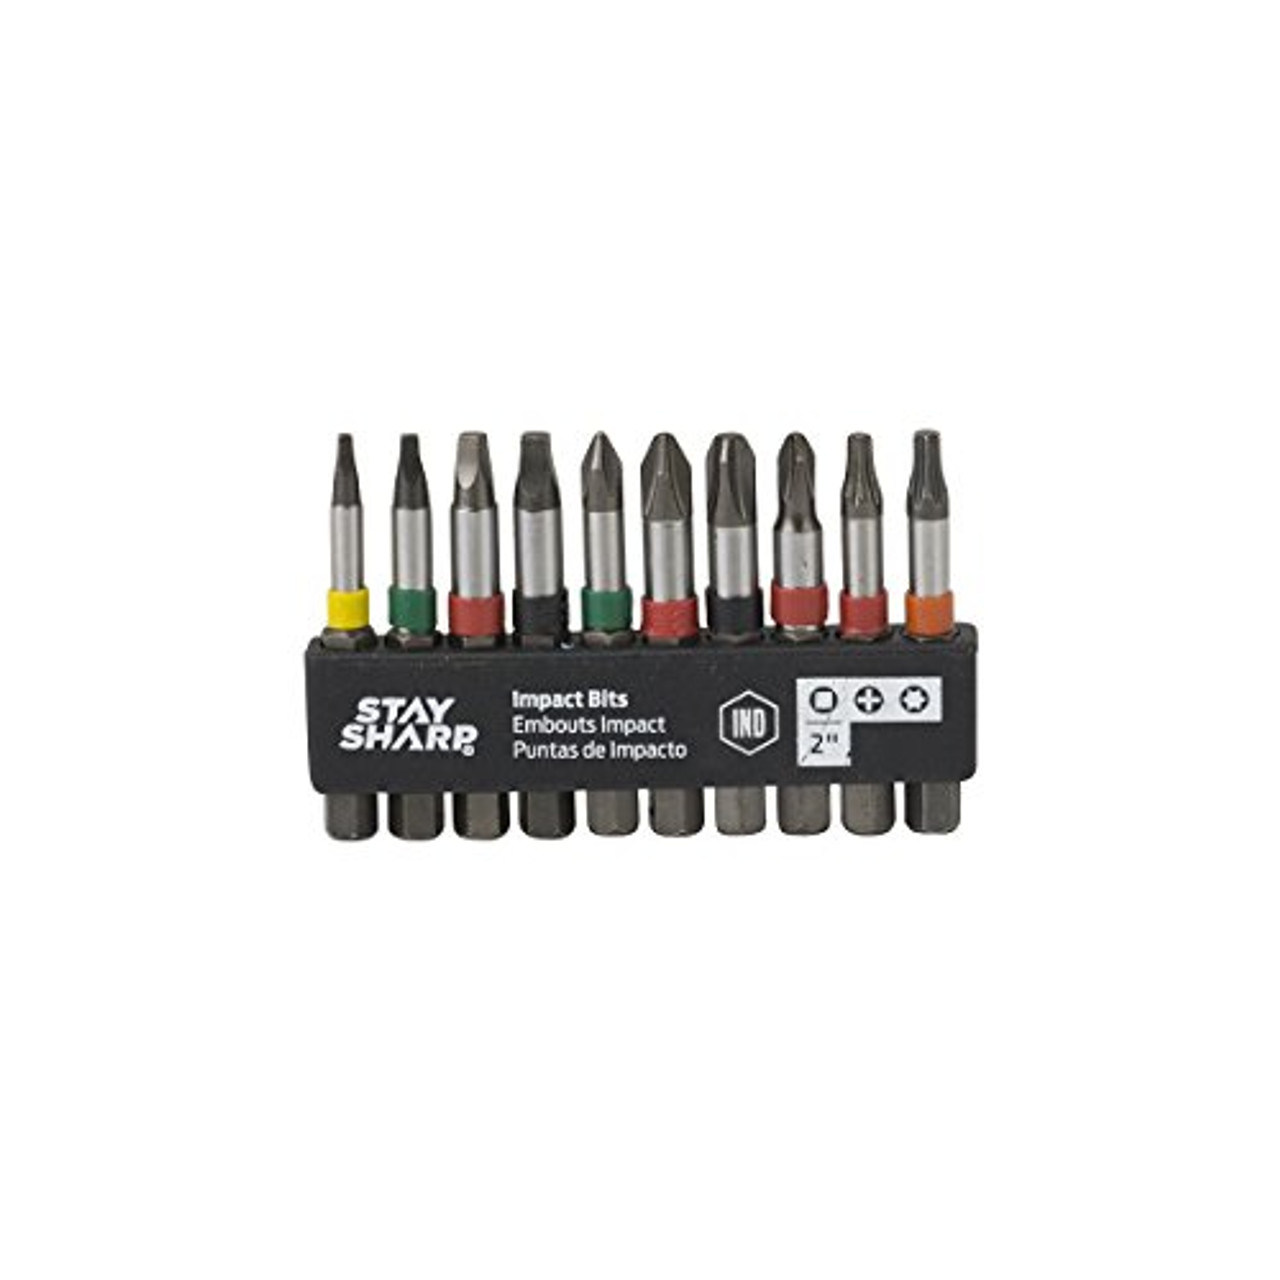 EAB Tool 98096 2" Sq#0,1,2,3; Ph #1,2,3,2Dry; T15-20 Impact Bit Clip (10 Pack) Industrial Screwdriver Bit - Recyclable,